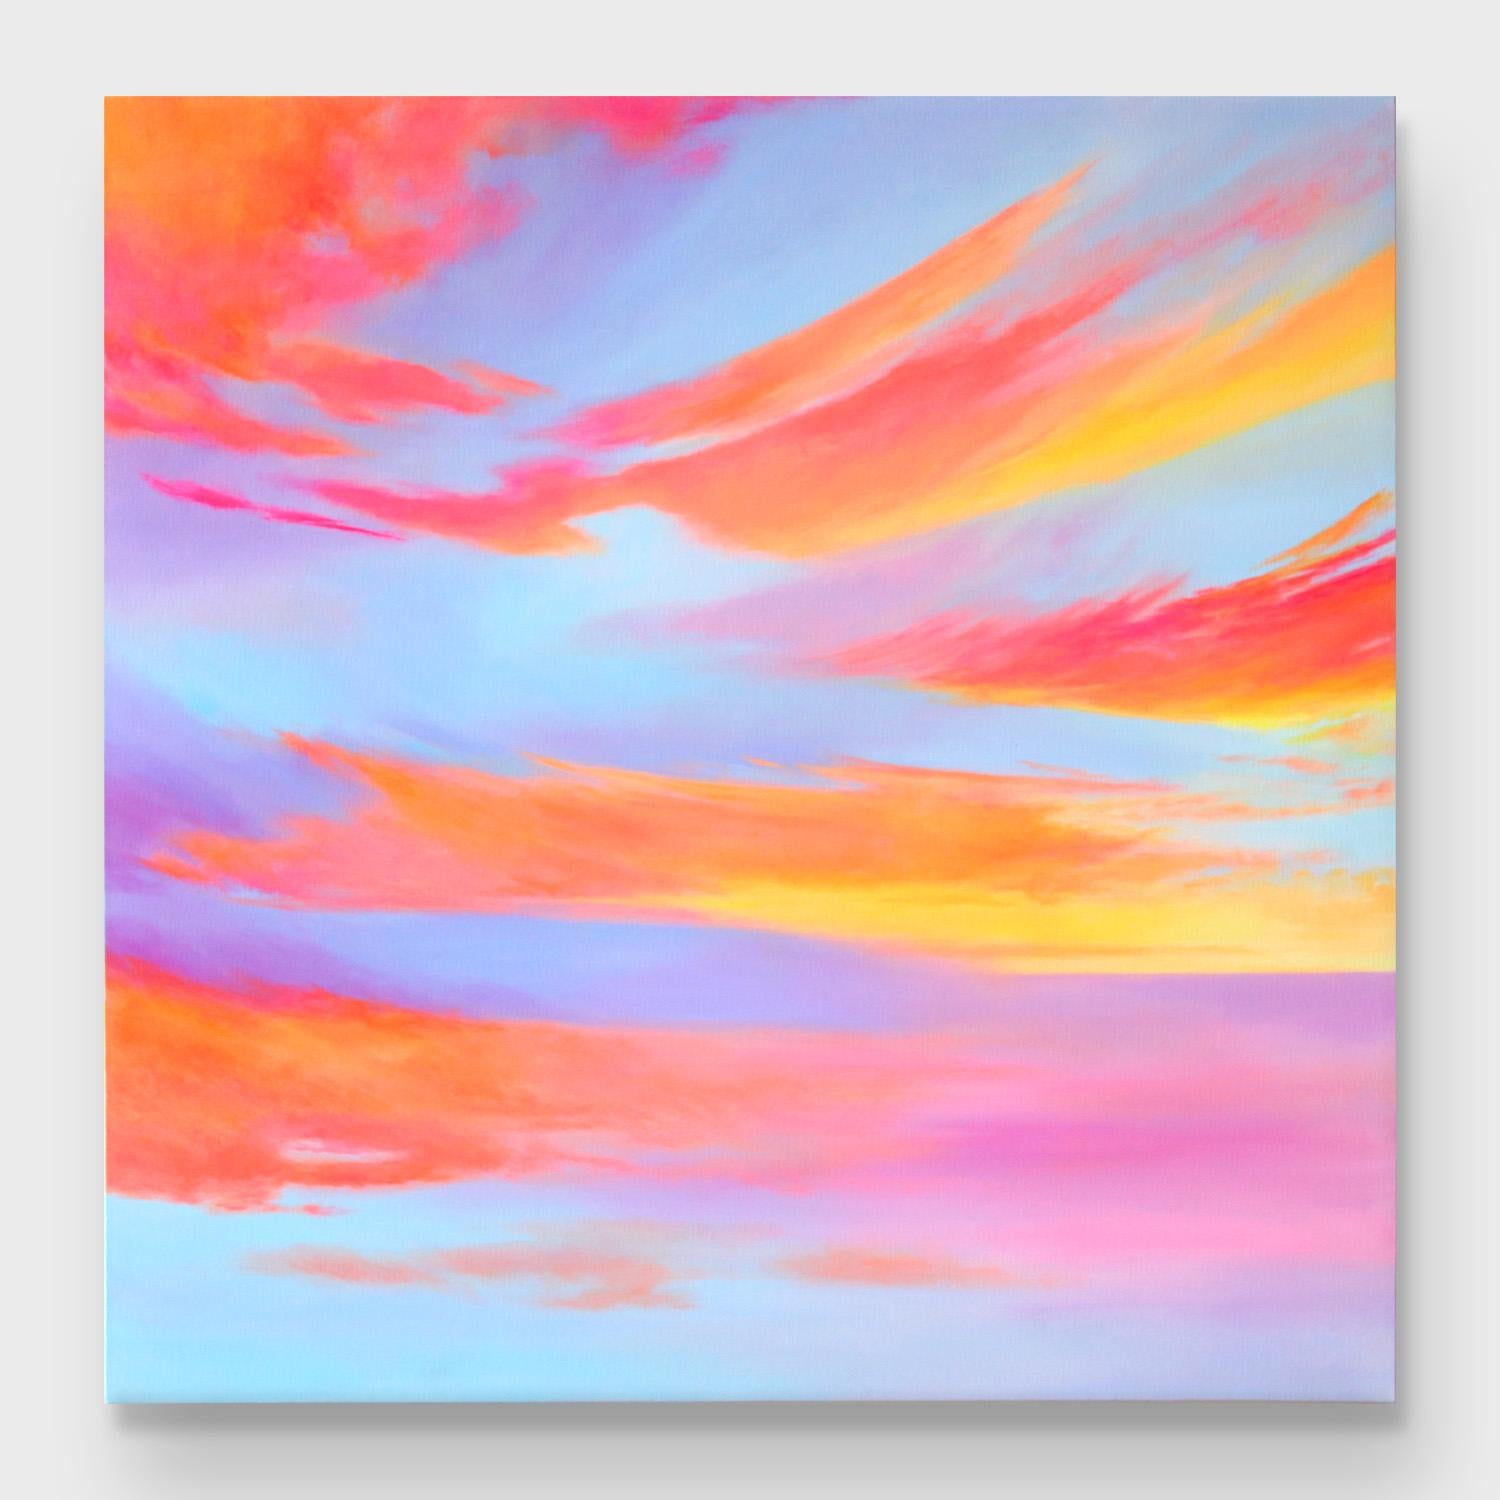 Stefanie Bales Abstract Painting - An Abstract Impressionist Acrylic on Canvas Painting, "Kaleidoscope Skies"